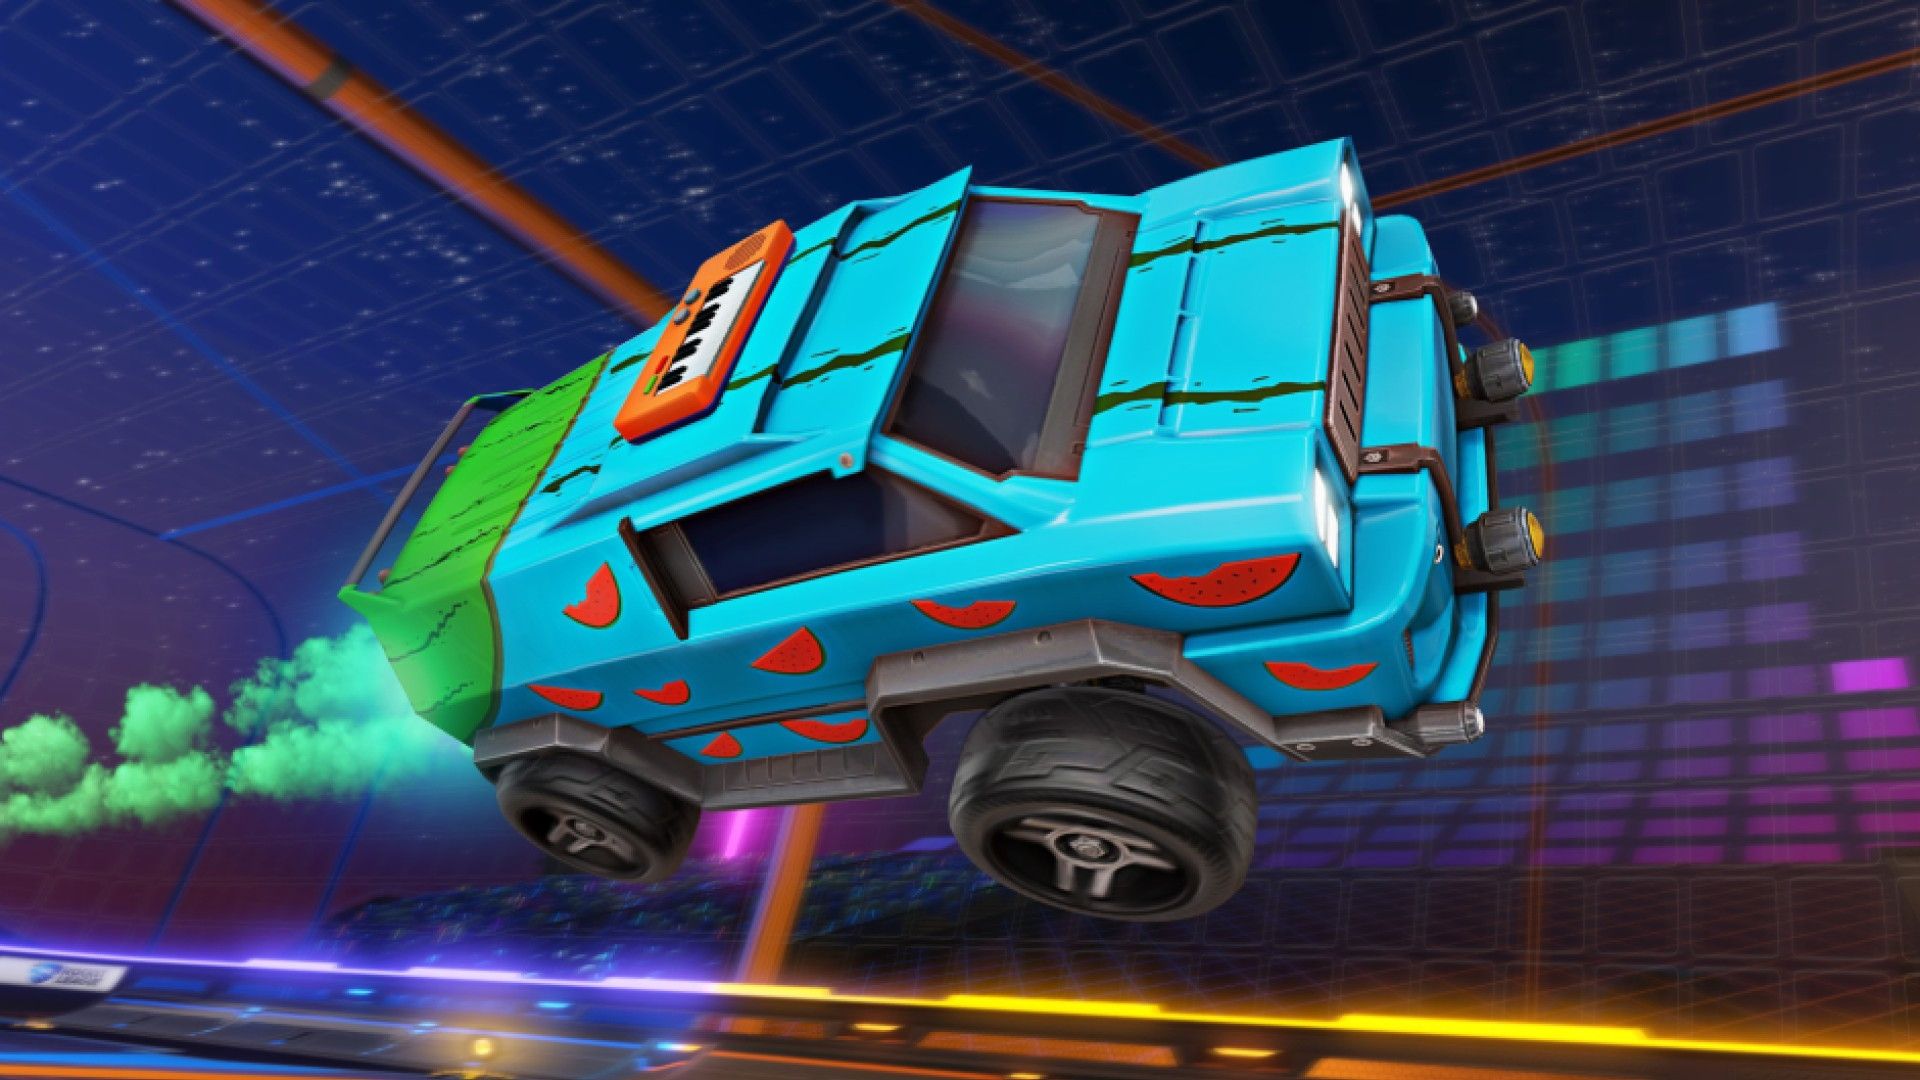 Season 2 Drops December 9 in Rocket League with Xbox Series X. S Optimizations